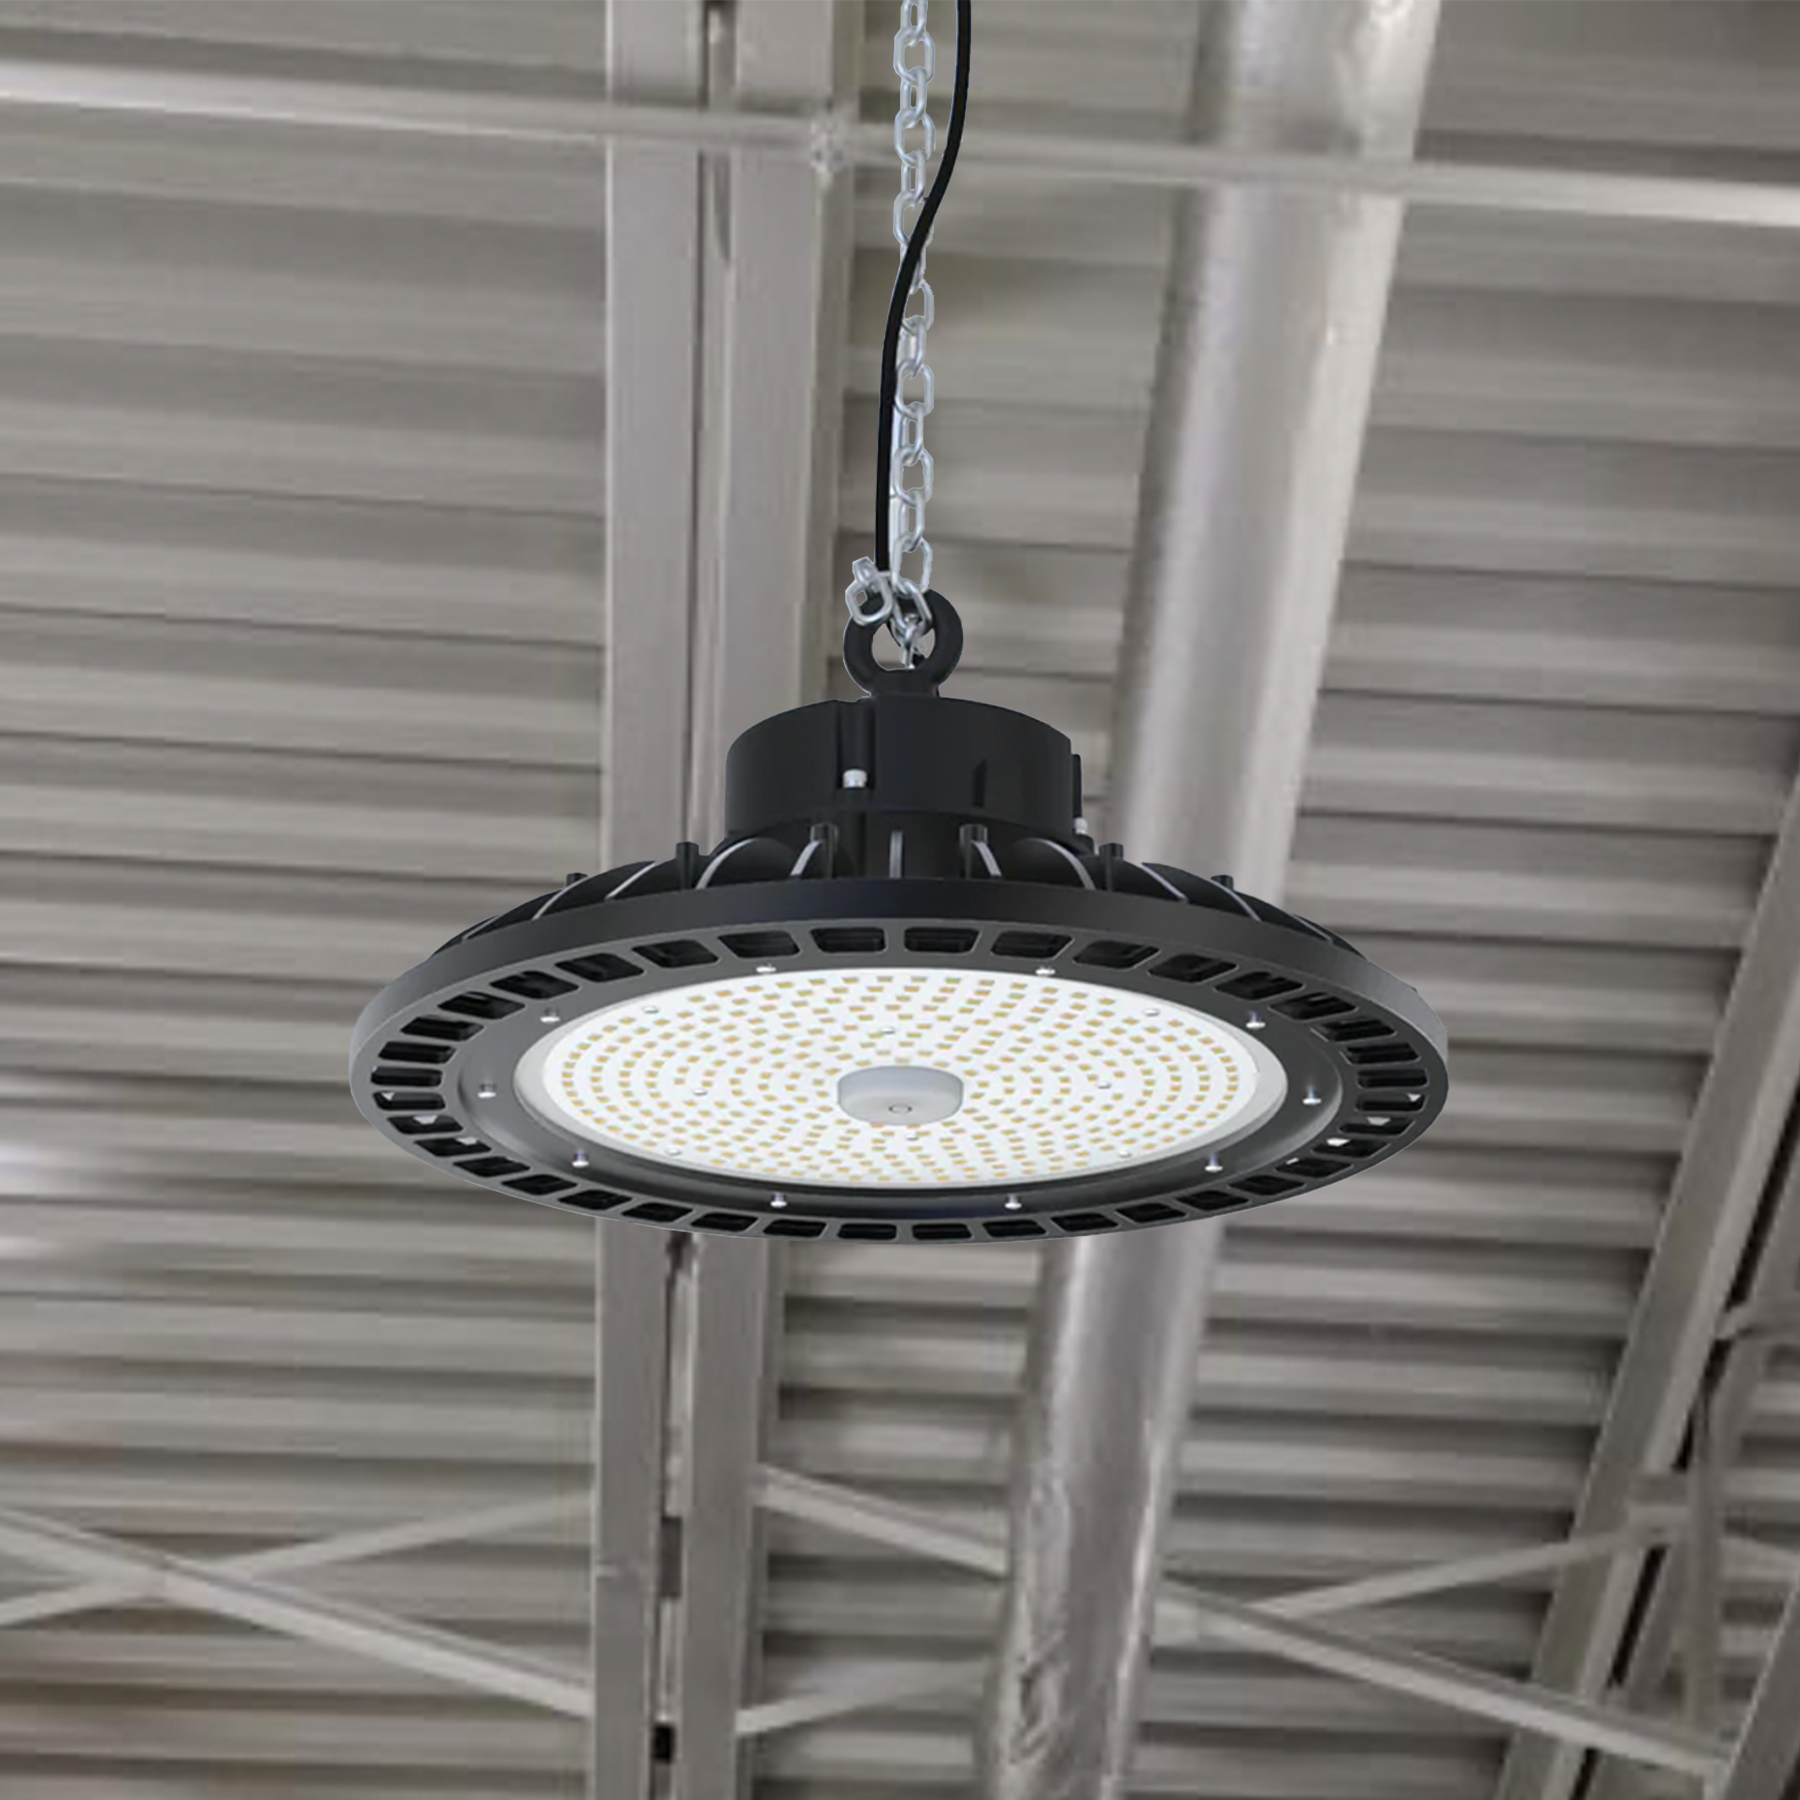 UFO LED High Bay Light - 150W, 4000K Cool White, 21750LM, UL DLC Listed, IP65 Rated, 1-10V Dim - For Warehouses, Retail Spaces, Workshops, Garages, Factories, Barns.